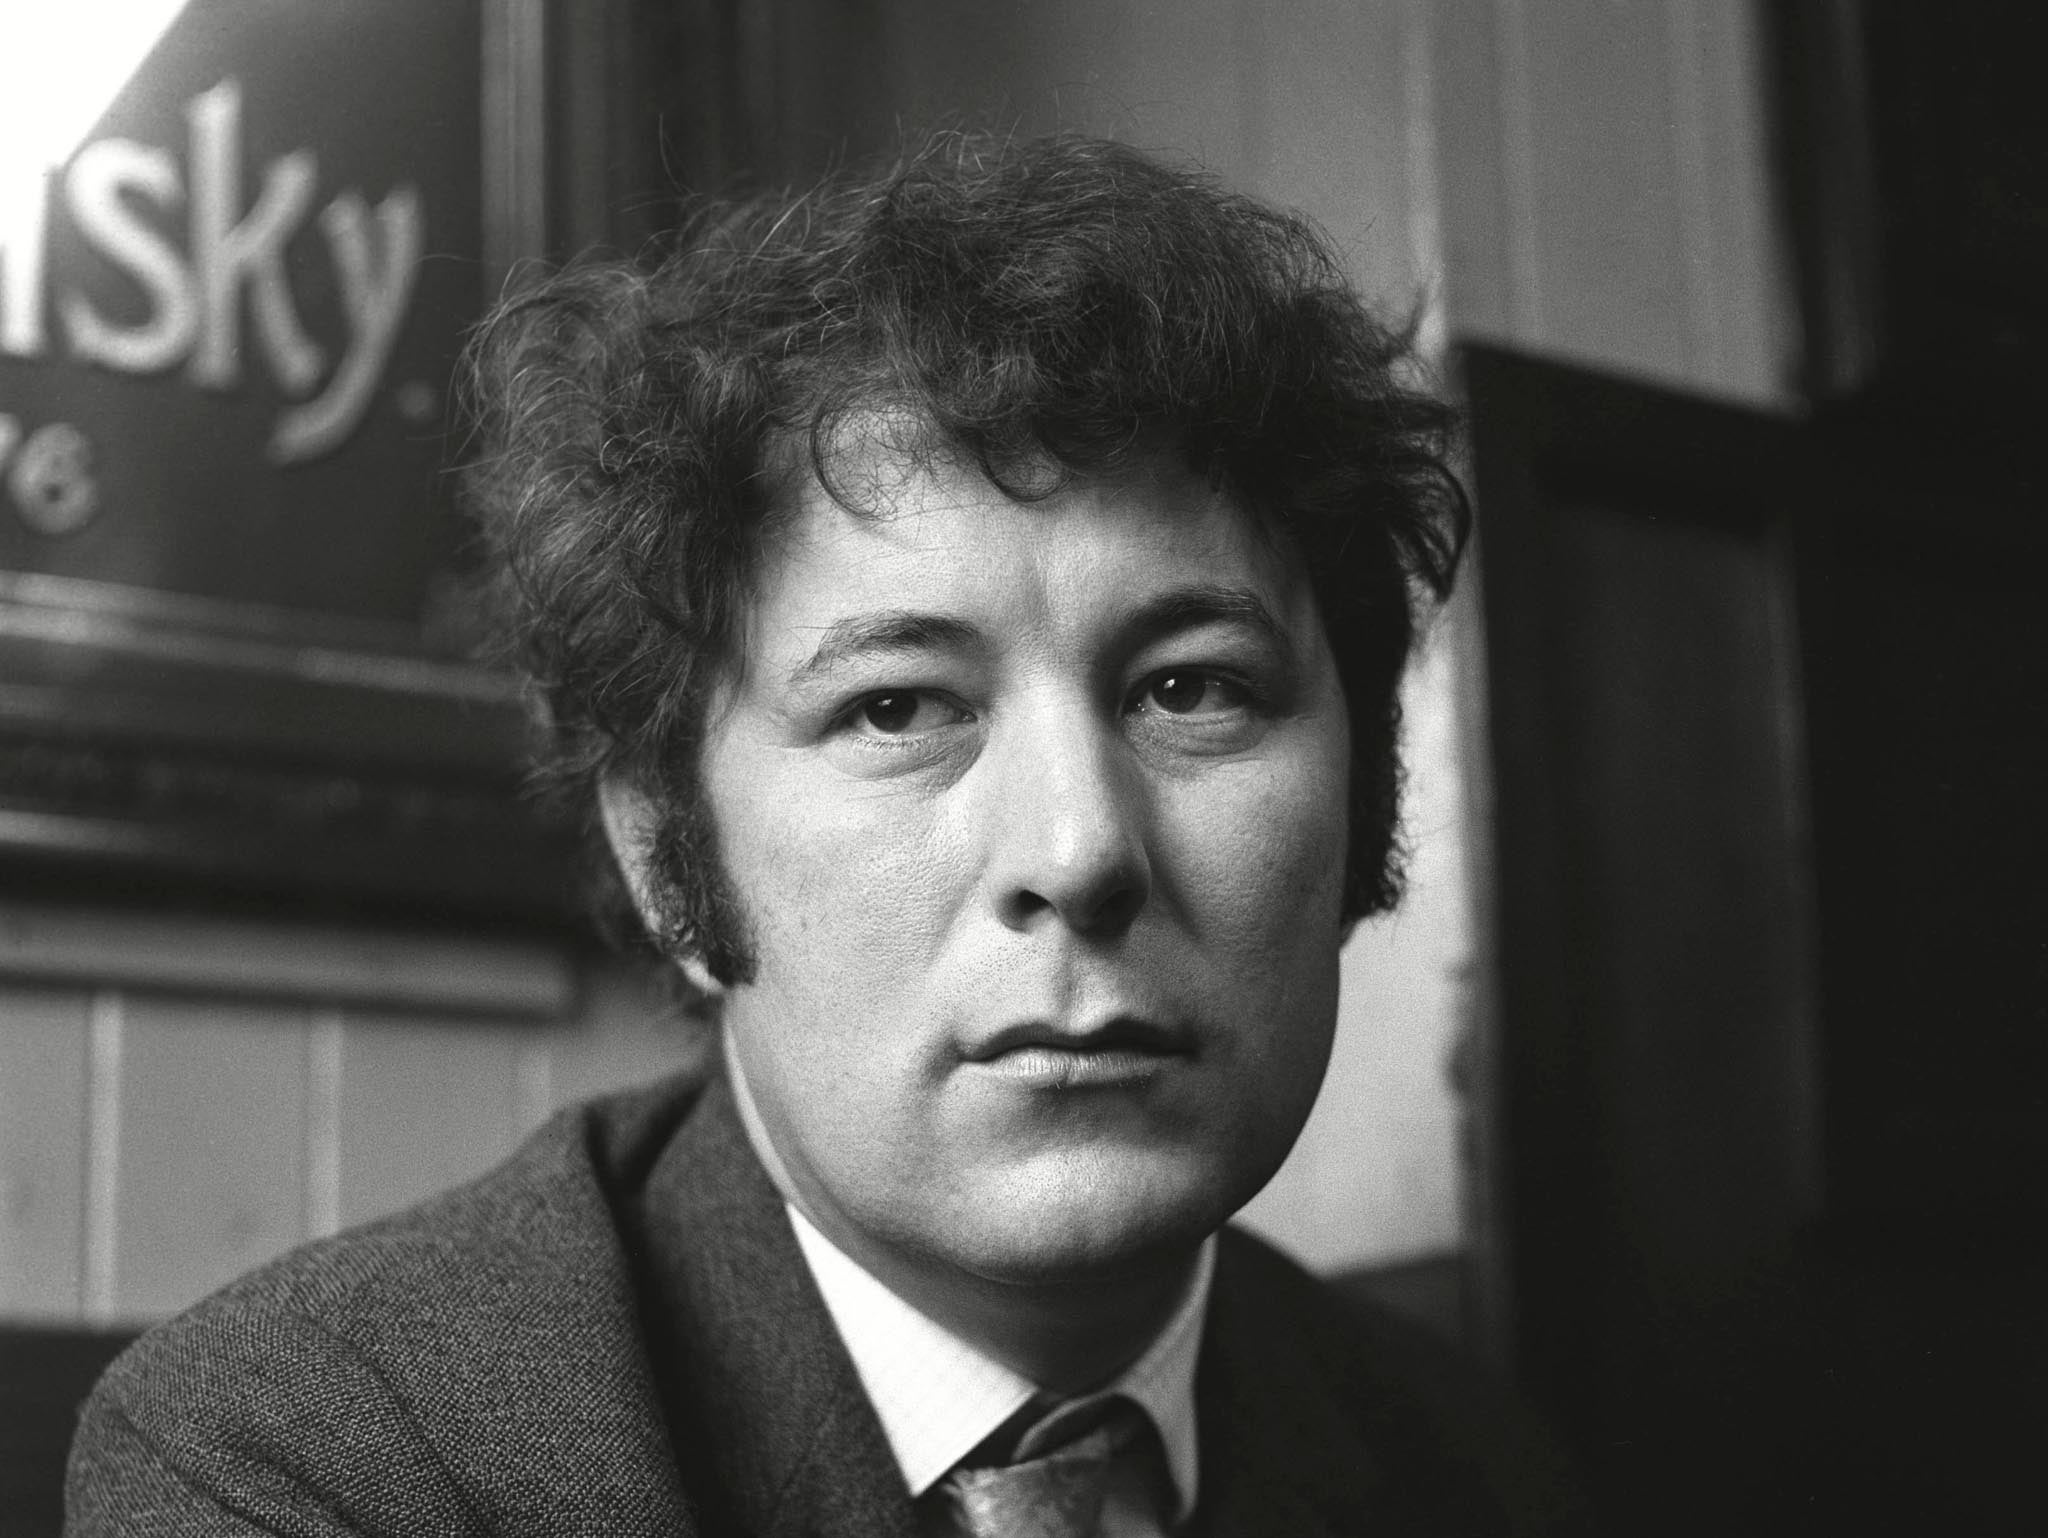 Seamus Heaney pictured in 1970